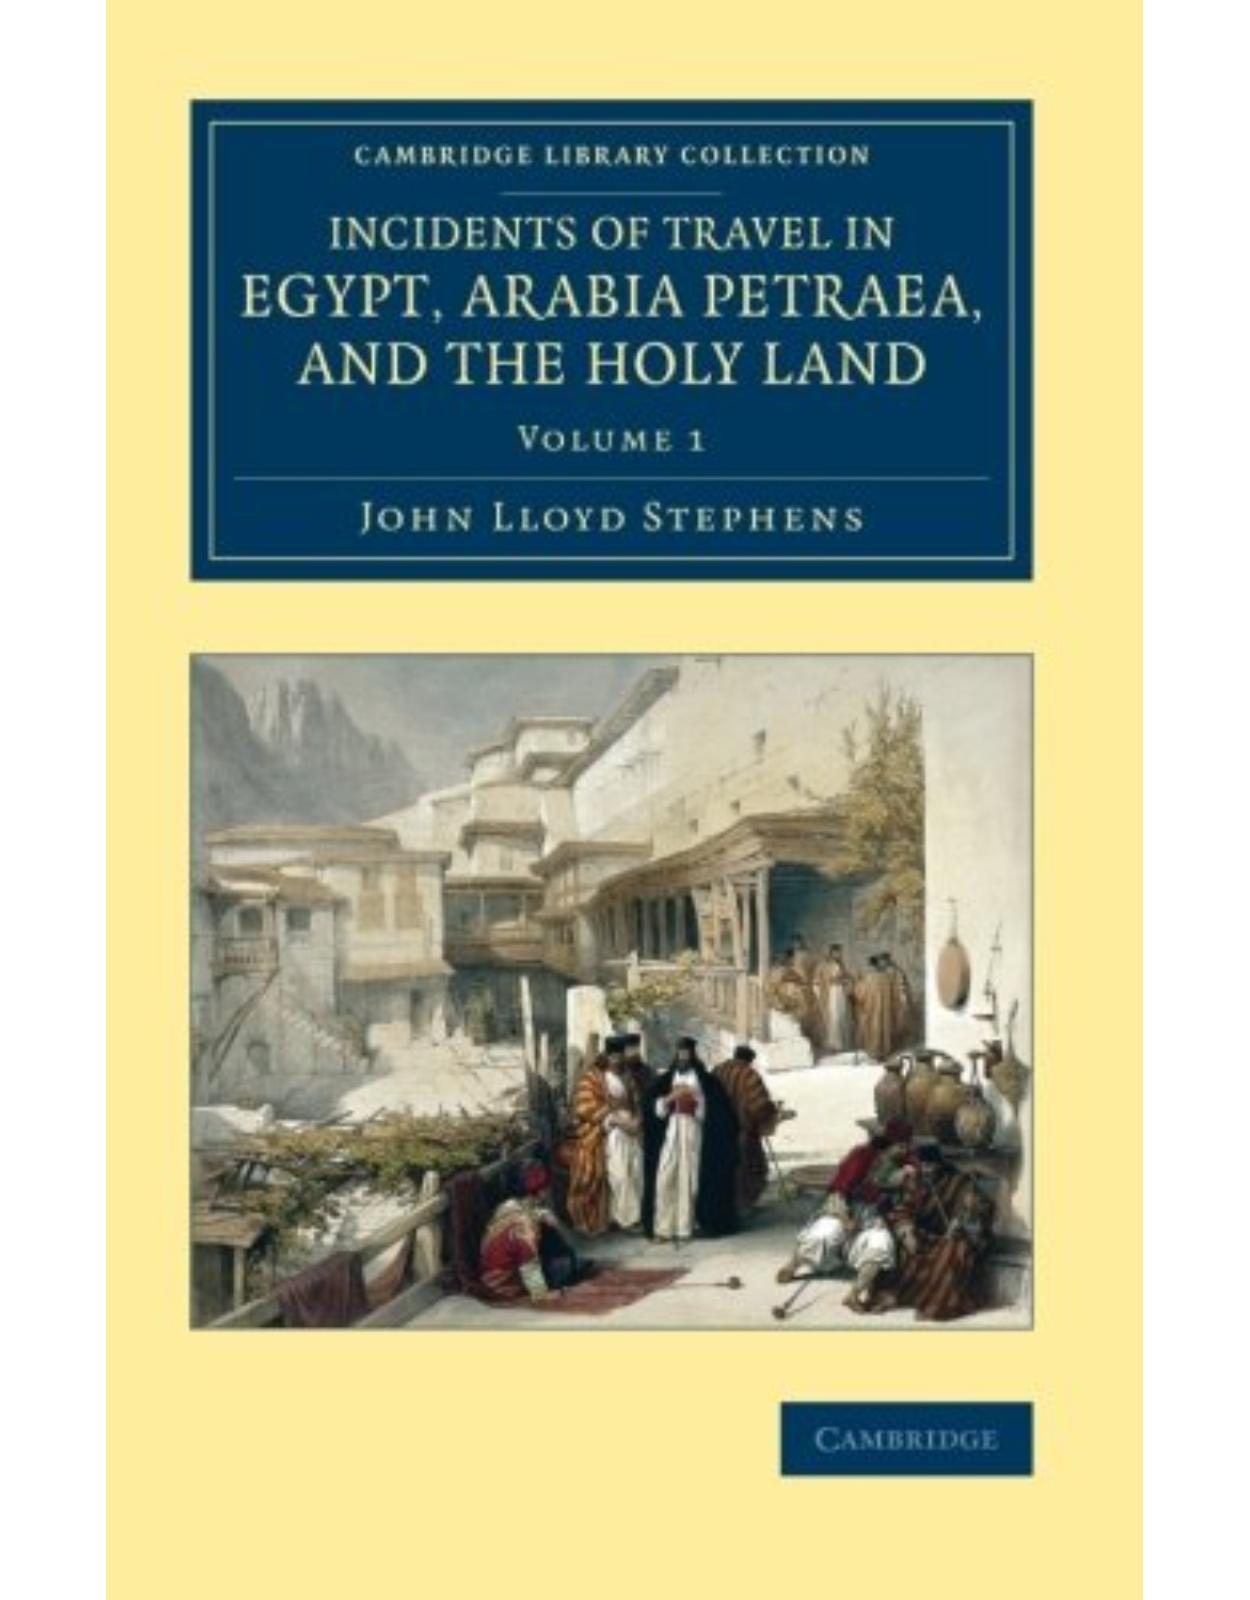 Incidents of Travel in Egypt, Arabia Petraea, and the Holy Land: Volume 1 (Cambridge Library Collection - Archaeology)